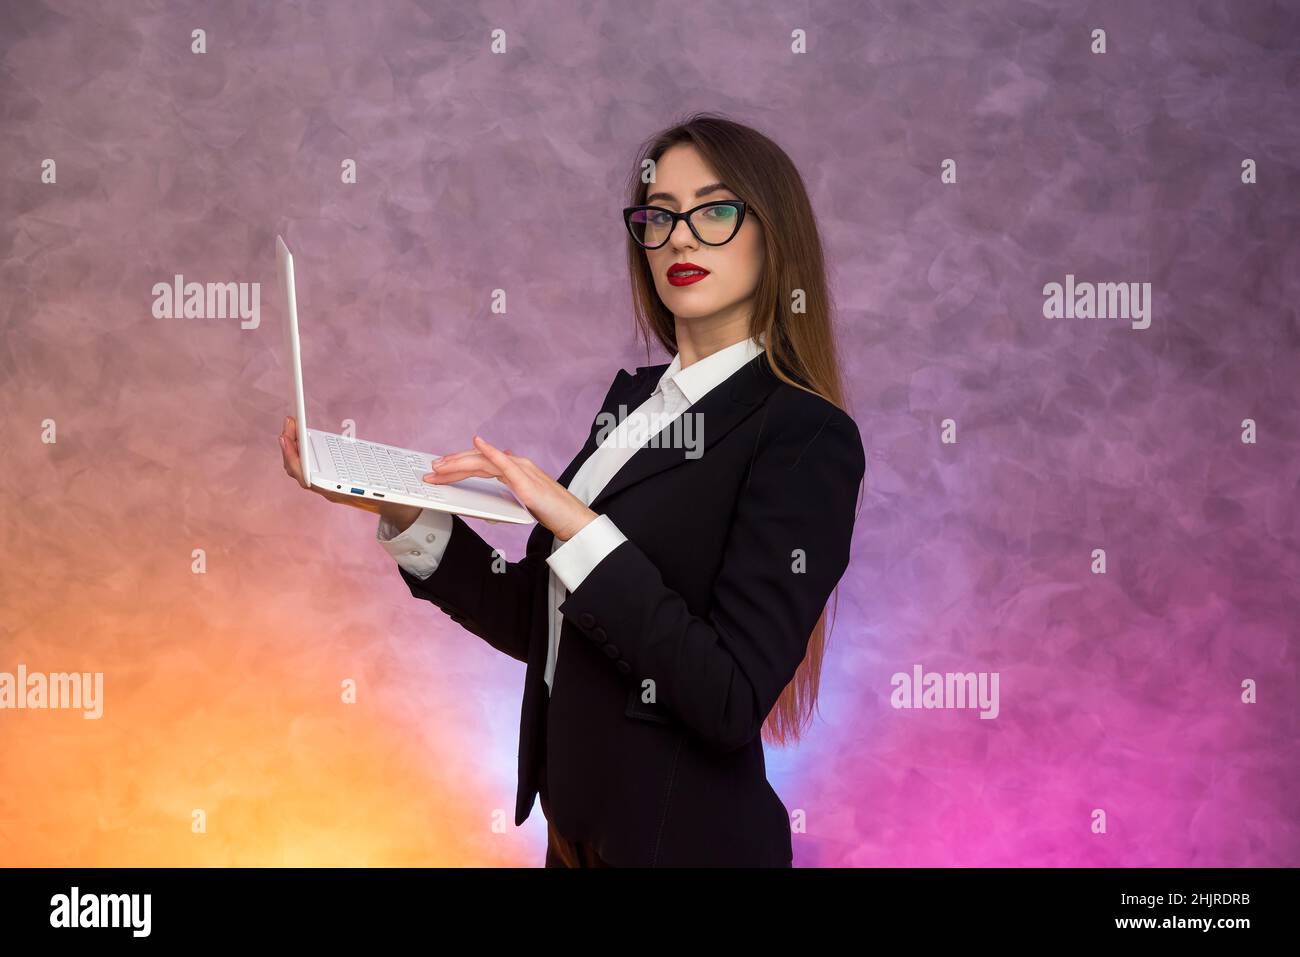 Attractive woman holding white laptop. Secretary or student or teacher posing on abstract background Stock Photo